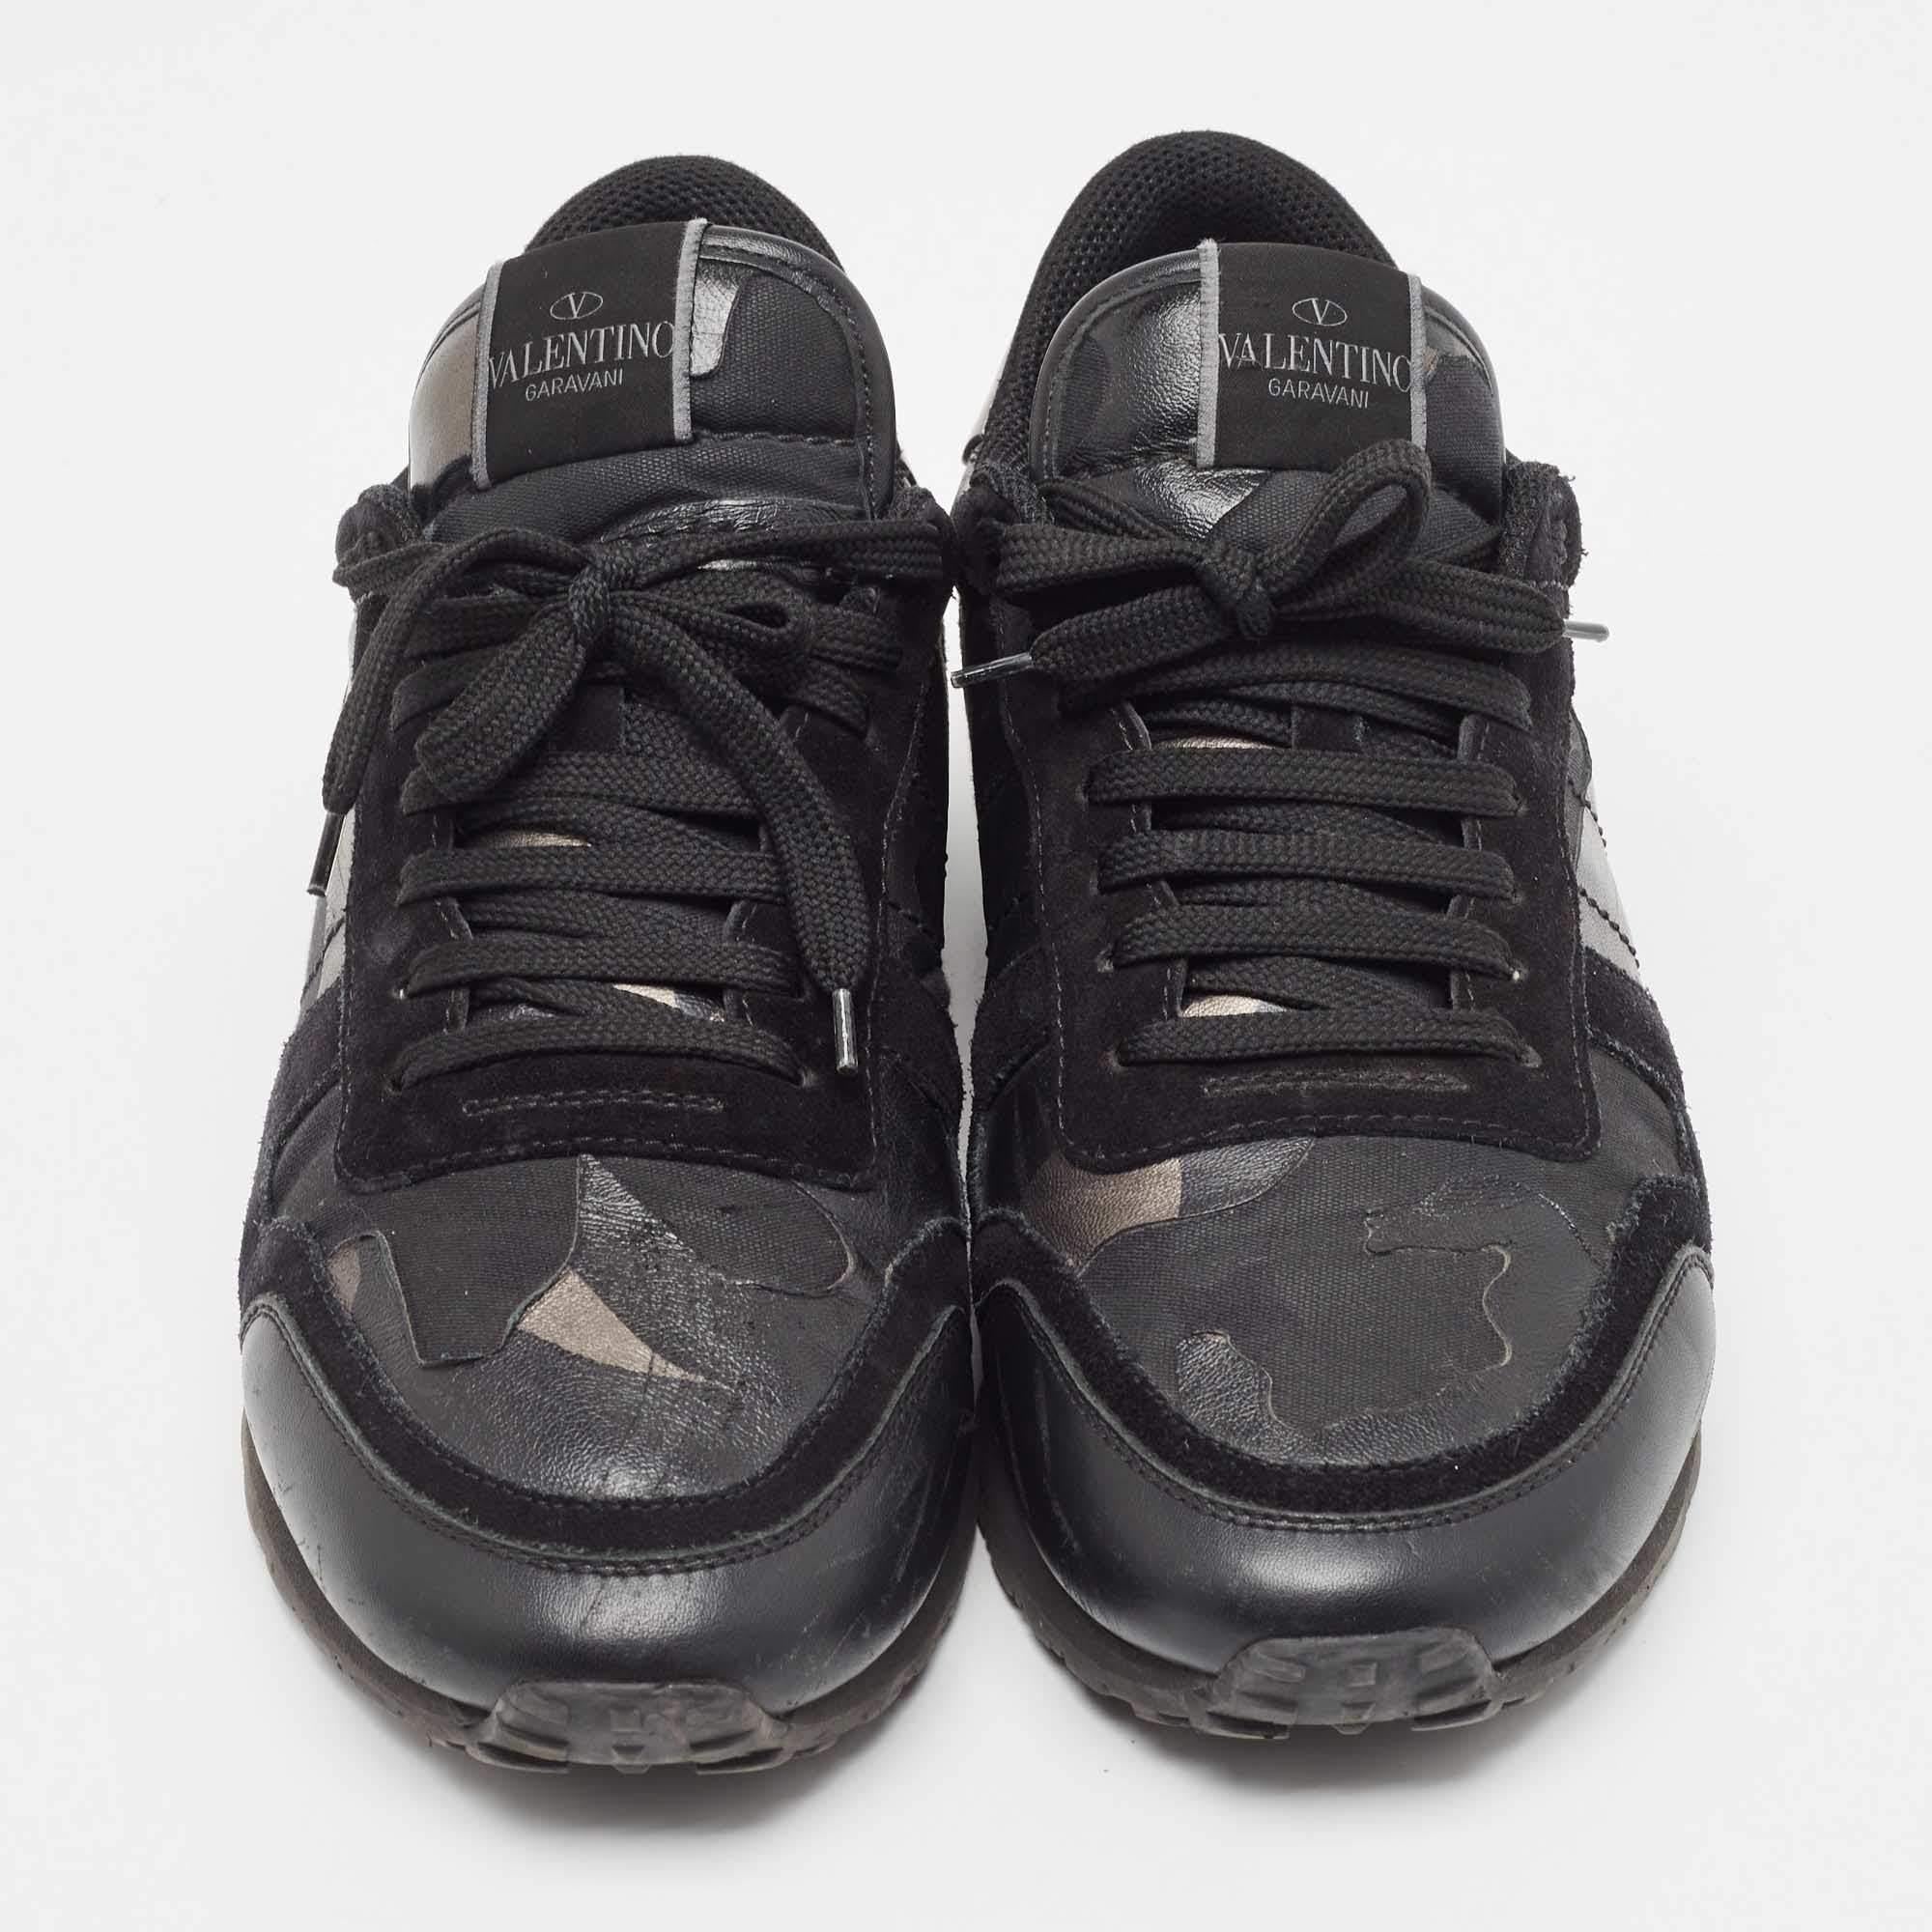 Men's Valentino Black/Metallic Leather and Suede Rockrunner Sneakers Size 43 For Sale